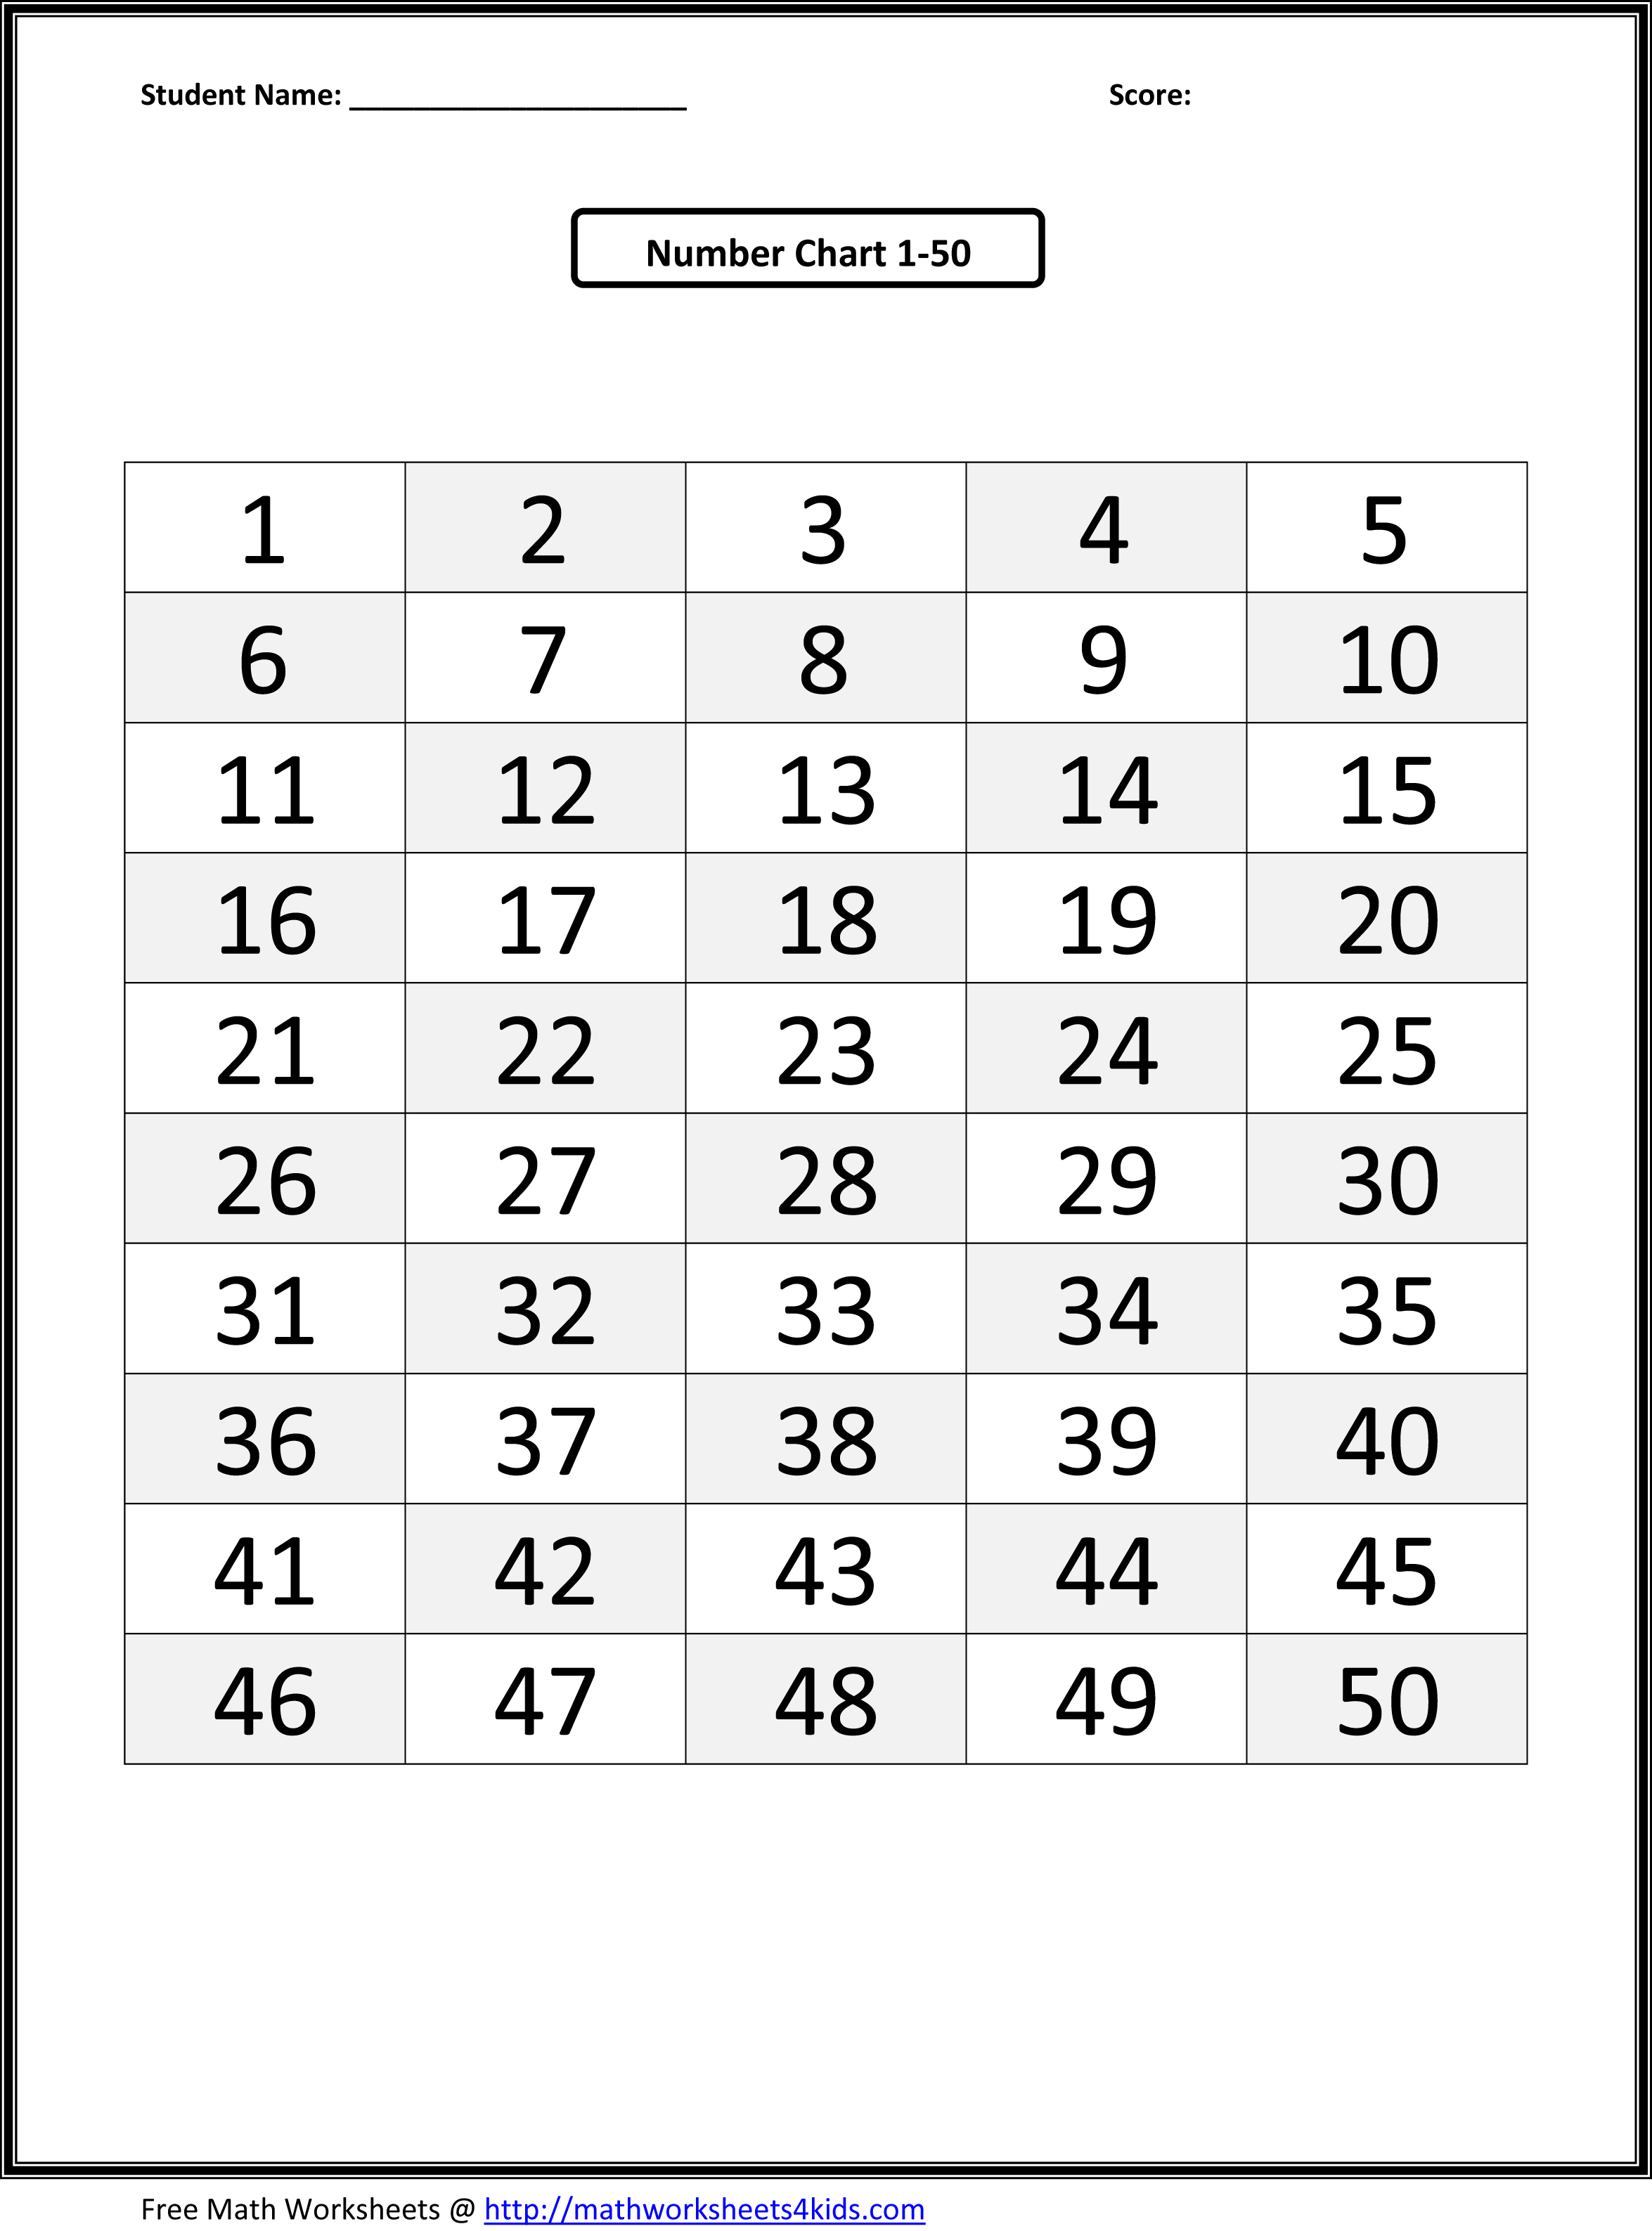 6-best-images-of-printable-number-chart-1-50-printable-number-chart-1-30-printable-number-1